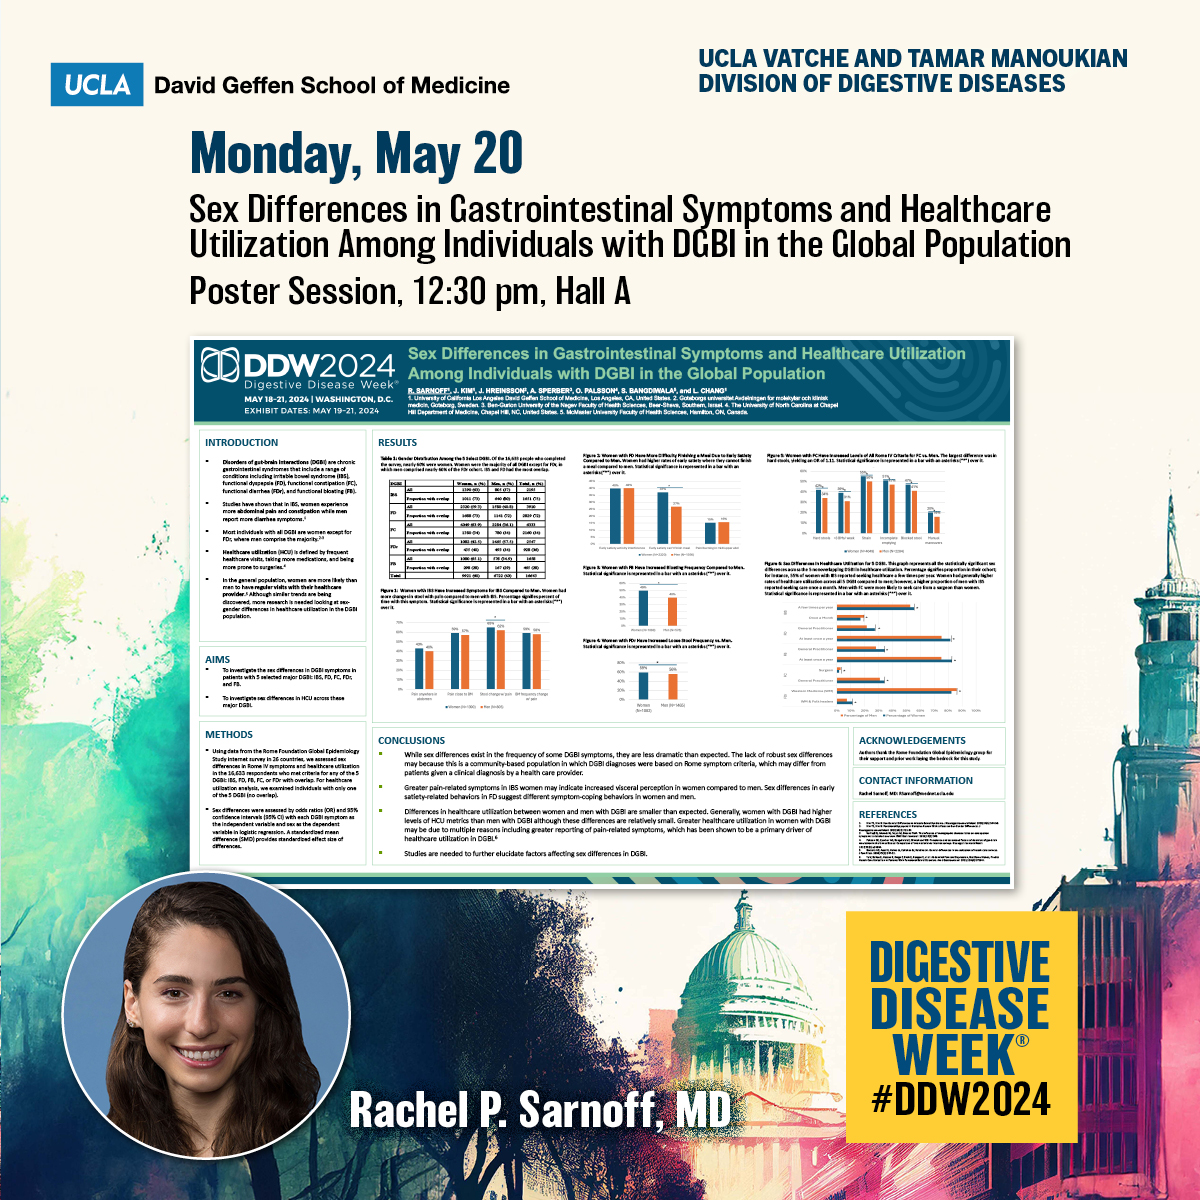 Sex Differences in Gastrointestinal Symptoms and Healthcare Utilization Among Individuals with #DGBI in the Global Population

🌟 Dr. Rachel P. Sarnoff (@RSarnoff)
👥JP Hreinsson AD Sperber @DrPalssonUNCSI Bangdiwala @LinChangMD
➡️#DDW2024 Monday, May 20, 12:30 pm, Hall A